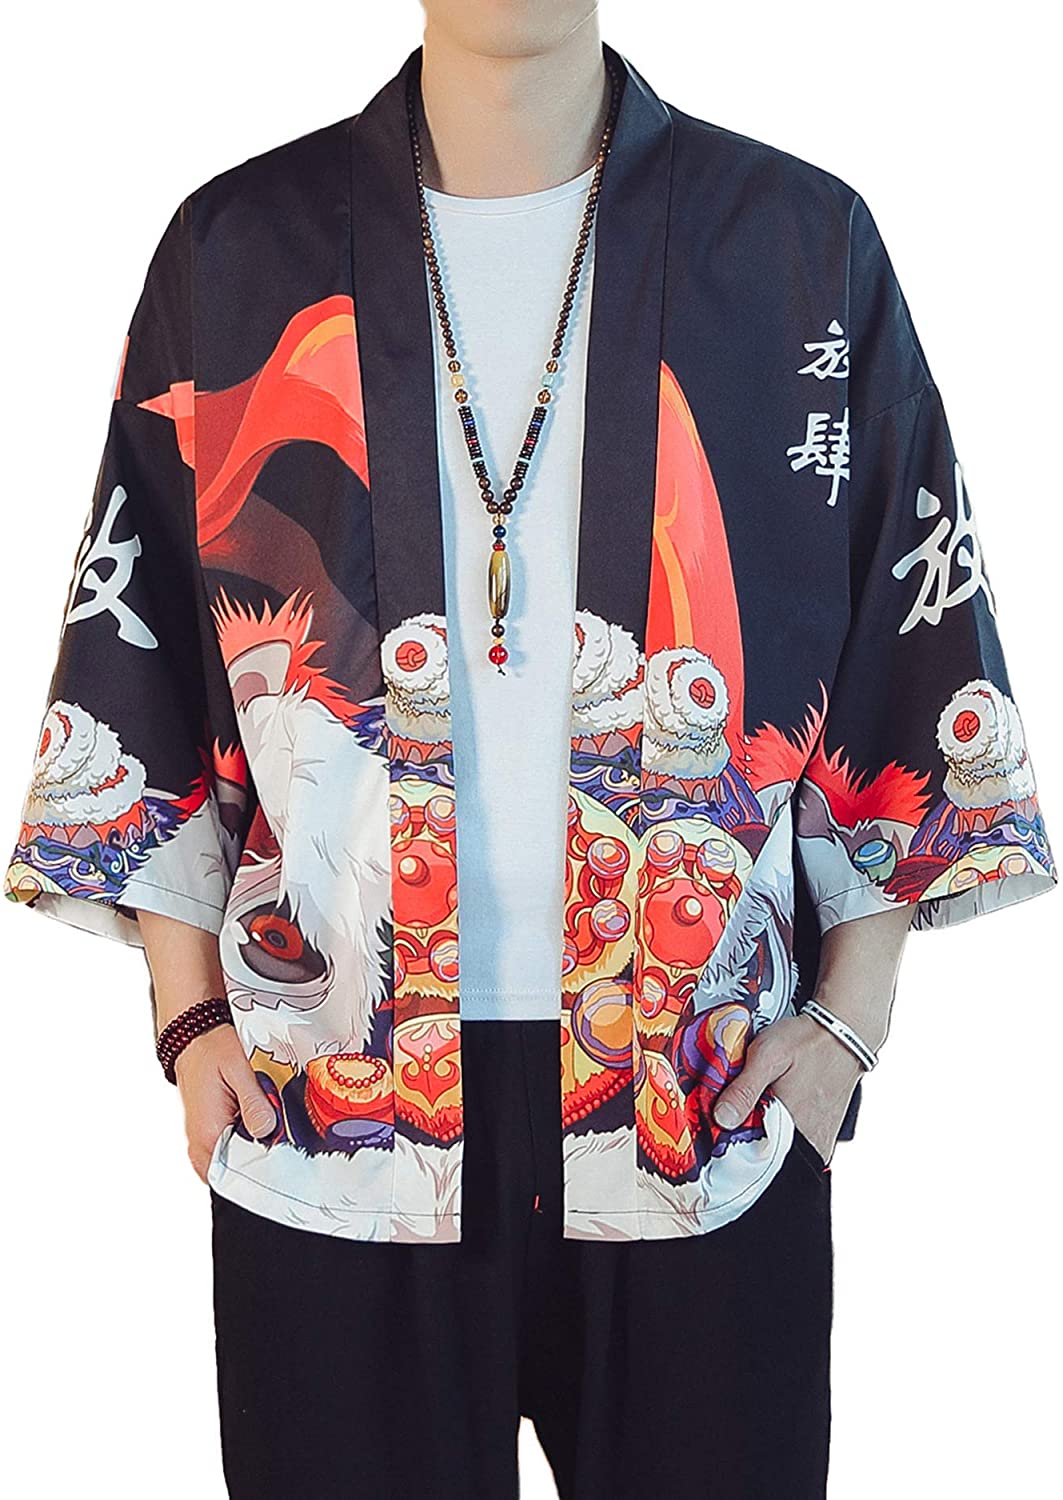 Mens Japan Kimono Cardigan Jacket Japanese Style Lightweight Casual Seven Sleeves Open Front Coat Outwear 